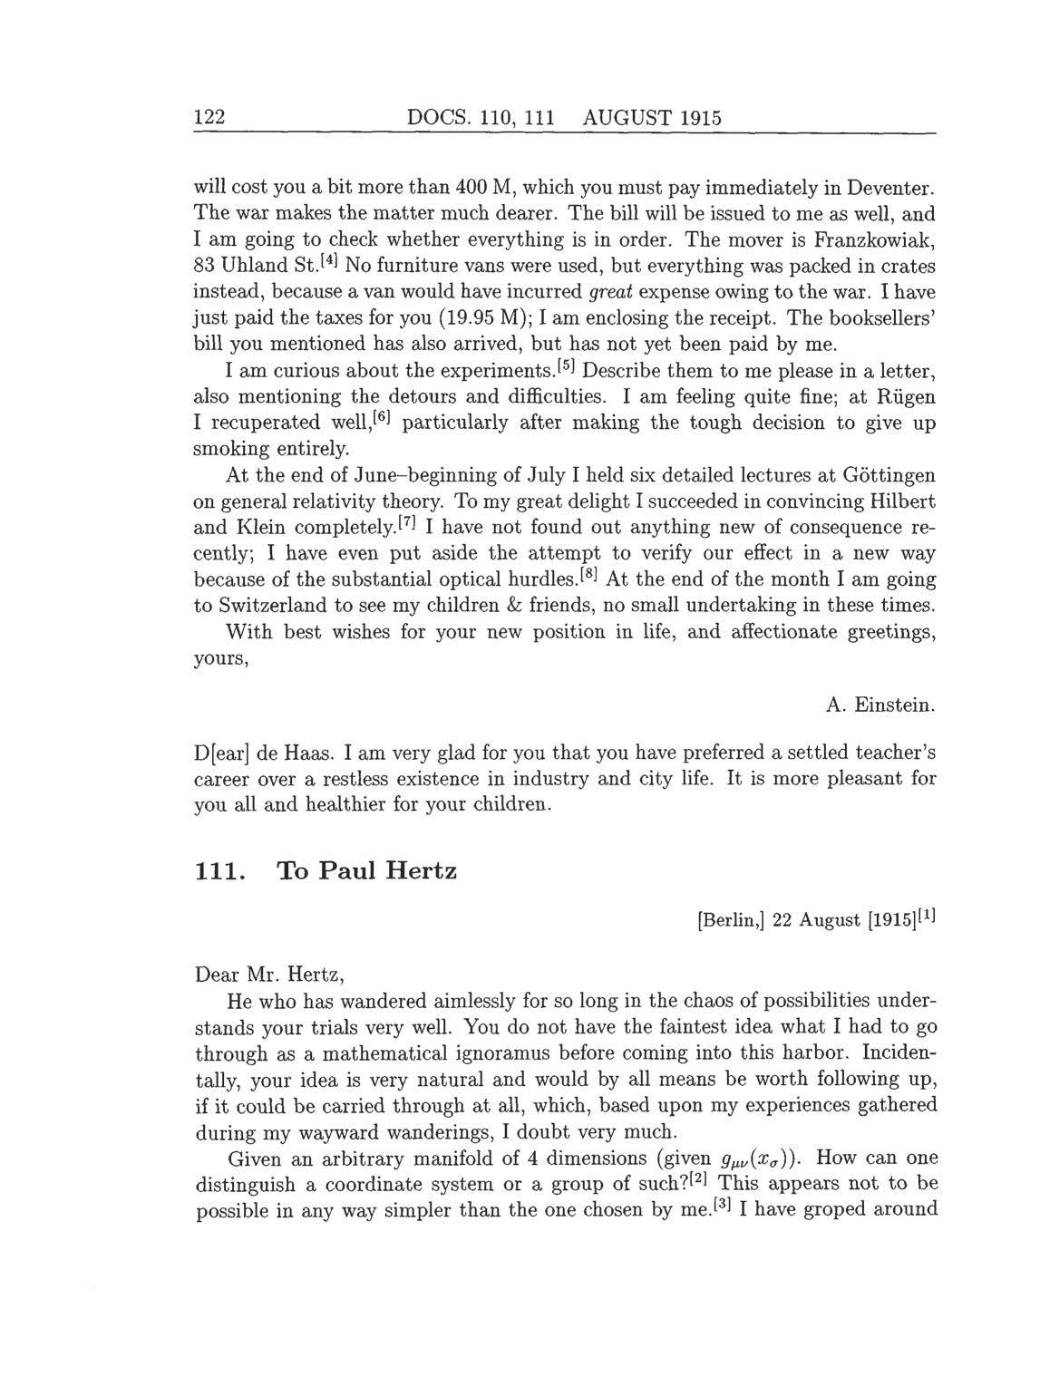 Volume 8: The Berlin Years: Correspondence, 1914-1918 (English translation supplement) page 122